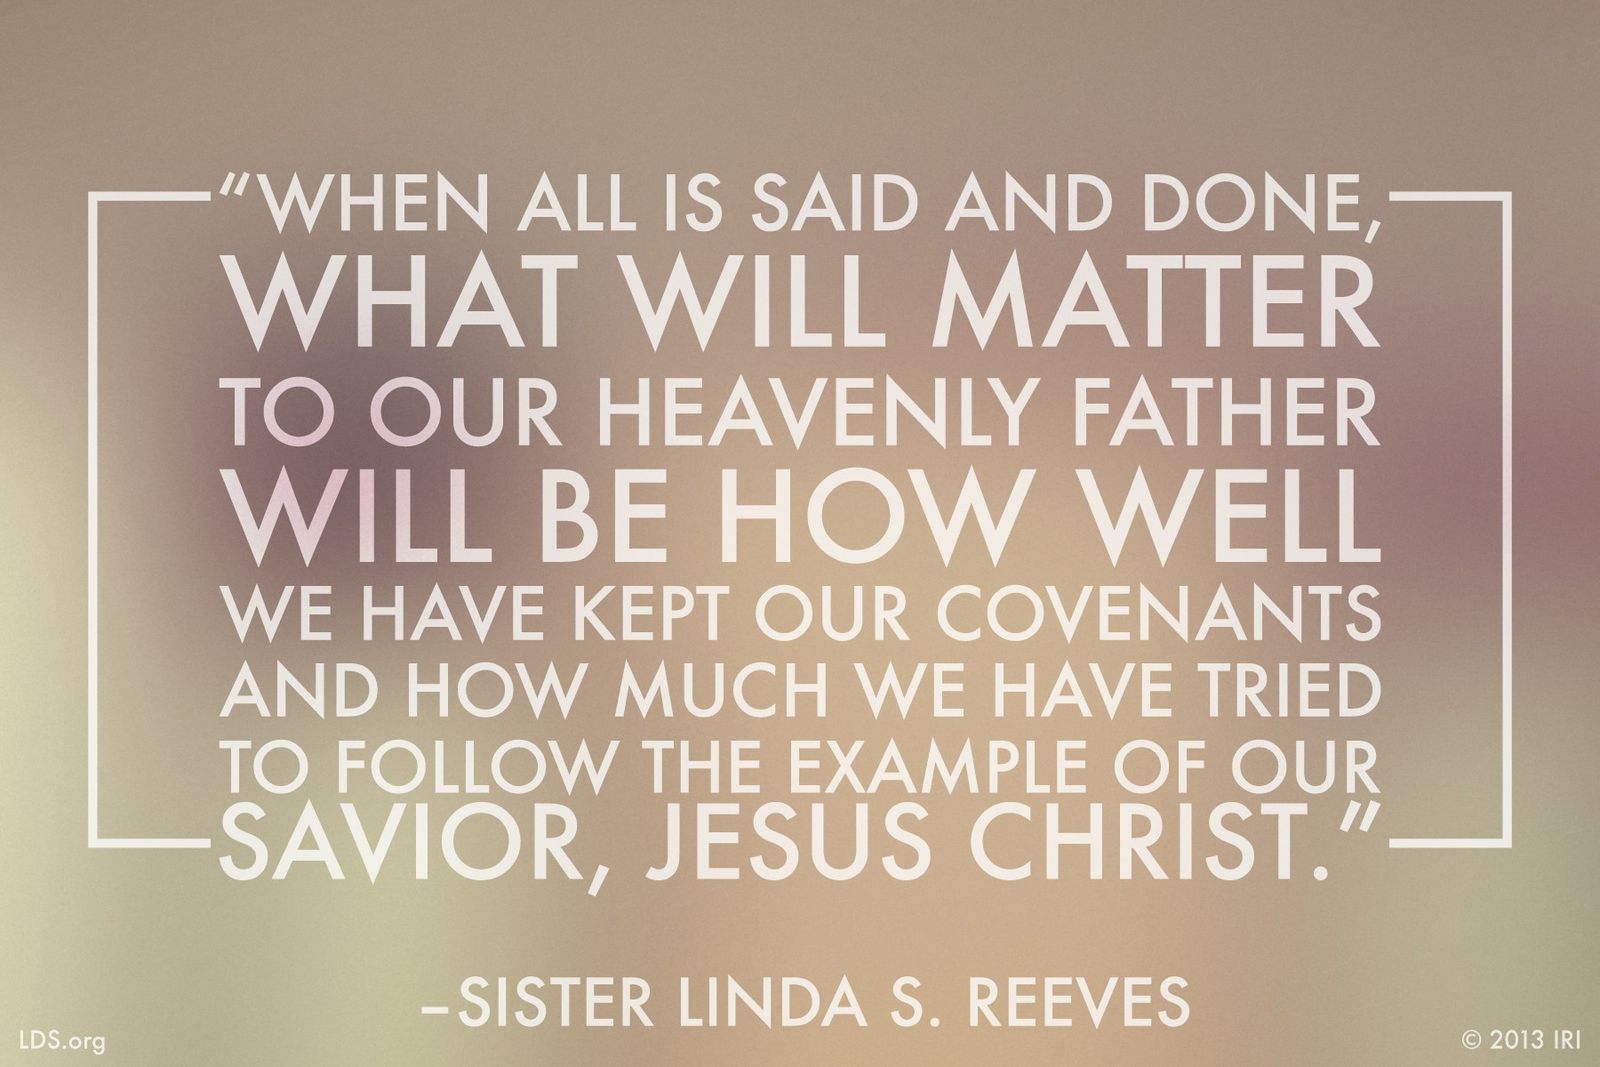 “When all is said and done, what will matter to our Heavenly Father will be how well we have kept our covenants and how much we have tried to follow the example of our Savior, Jesus Christ.”—Sister Linda S. Reeves, “Claim the Blessings of Your Covenants”